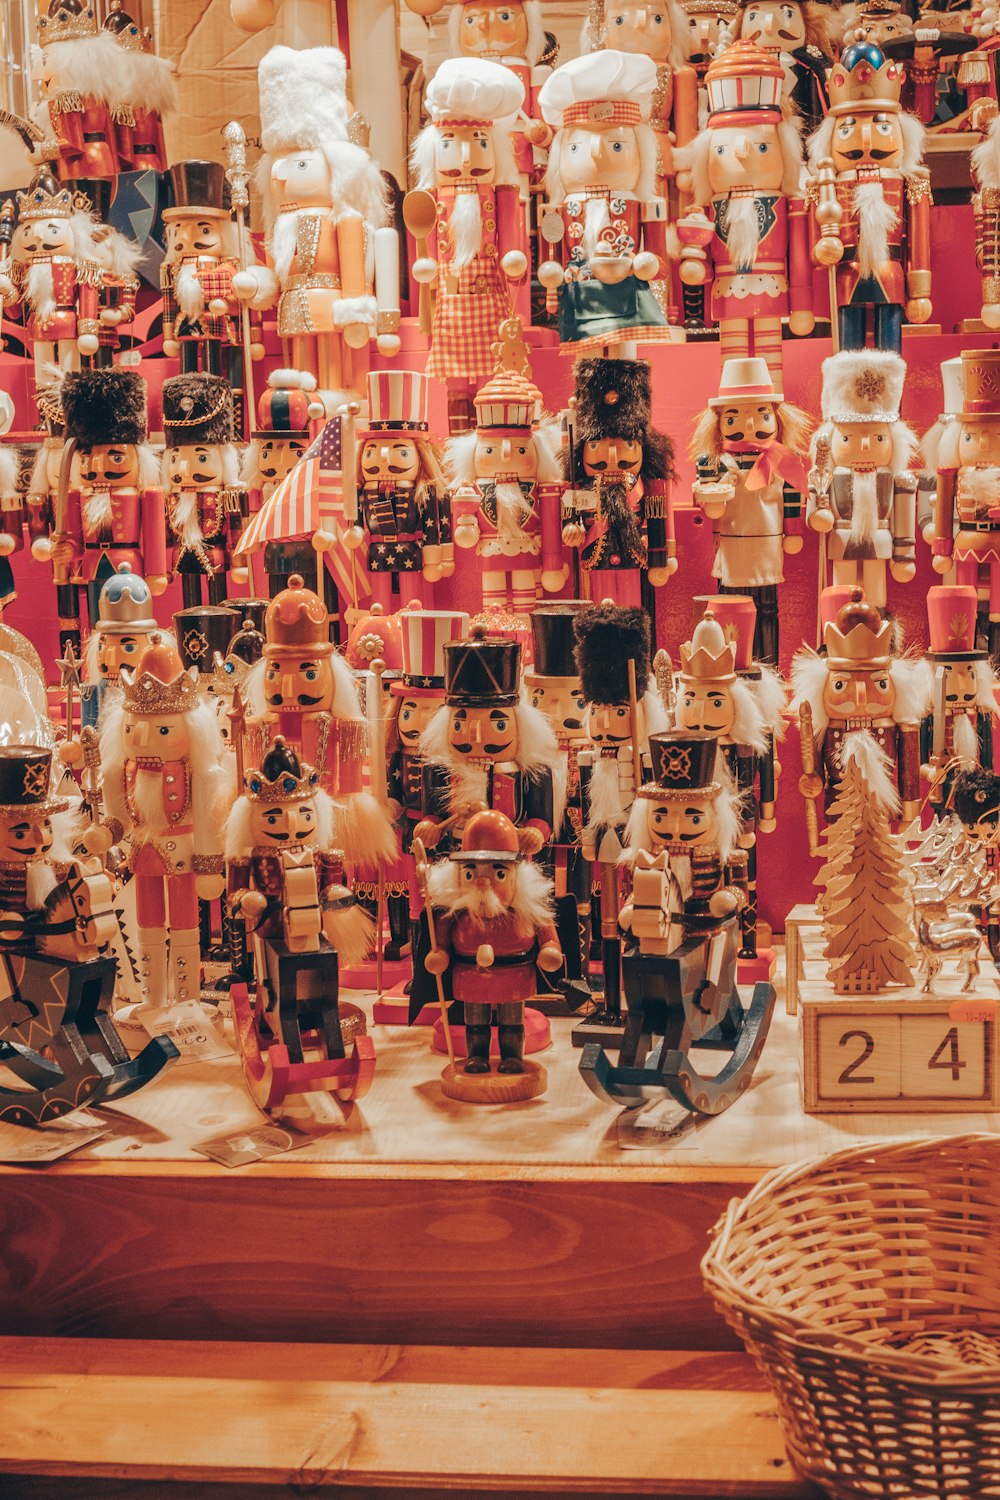 a display of nutcrackers and other holiday decorations